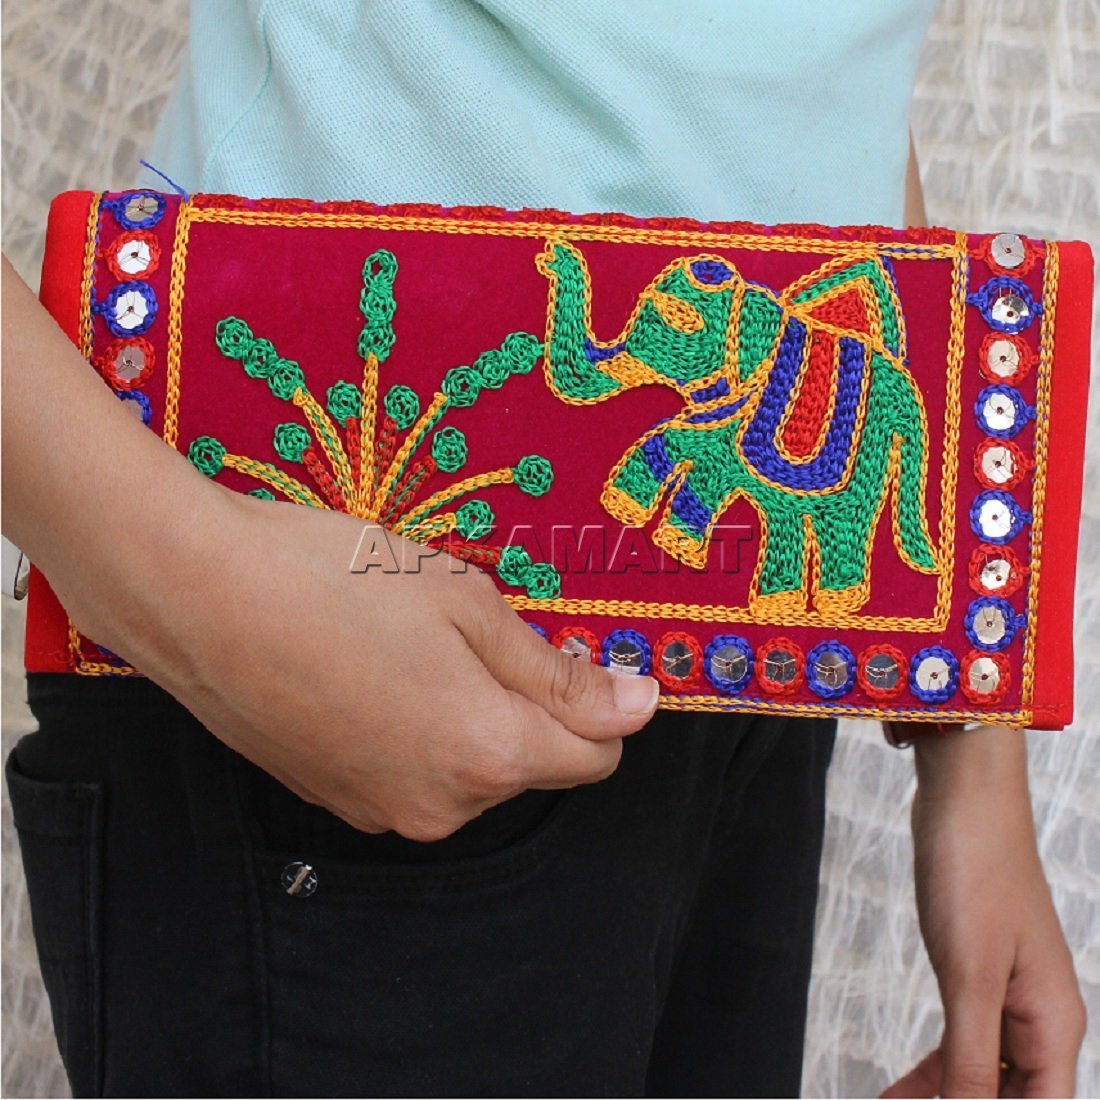 Best Brands To Buy Embroidered Bags In Delhi | So Delhi